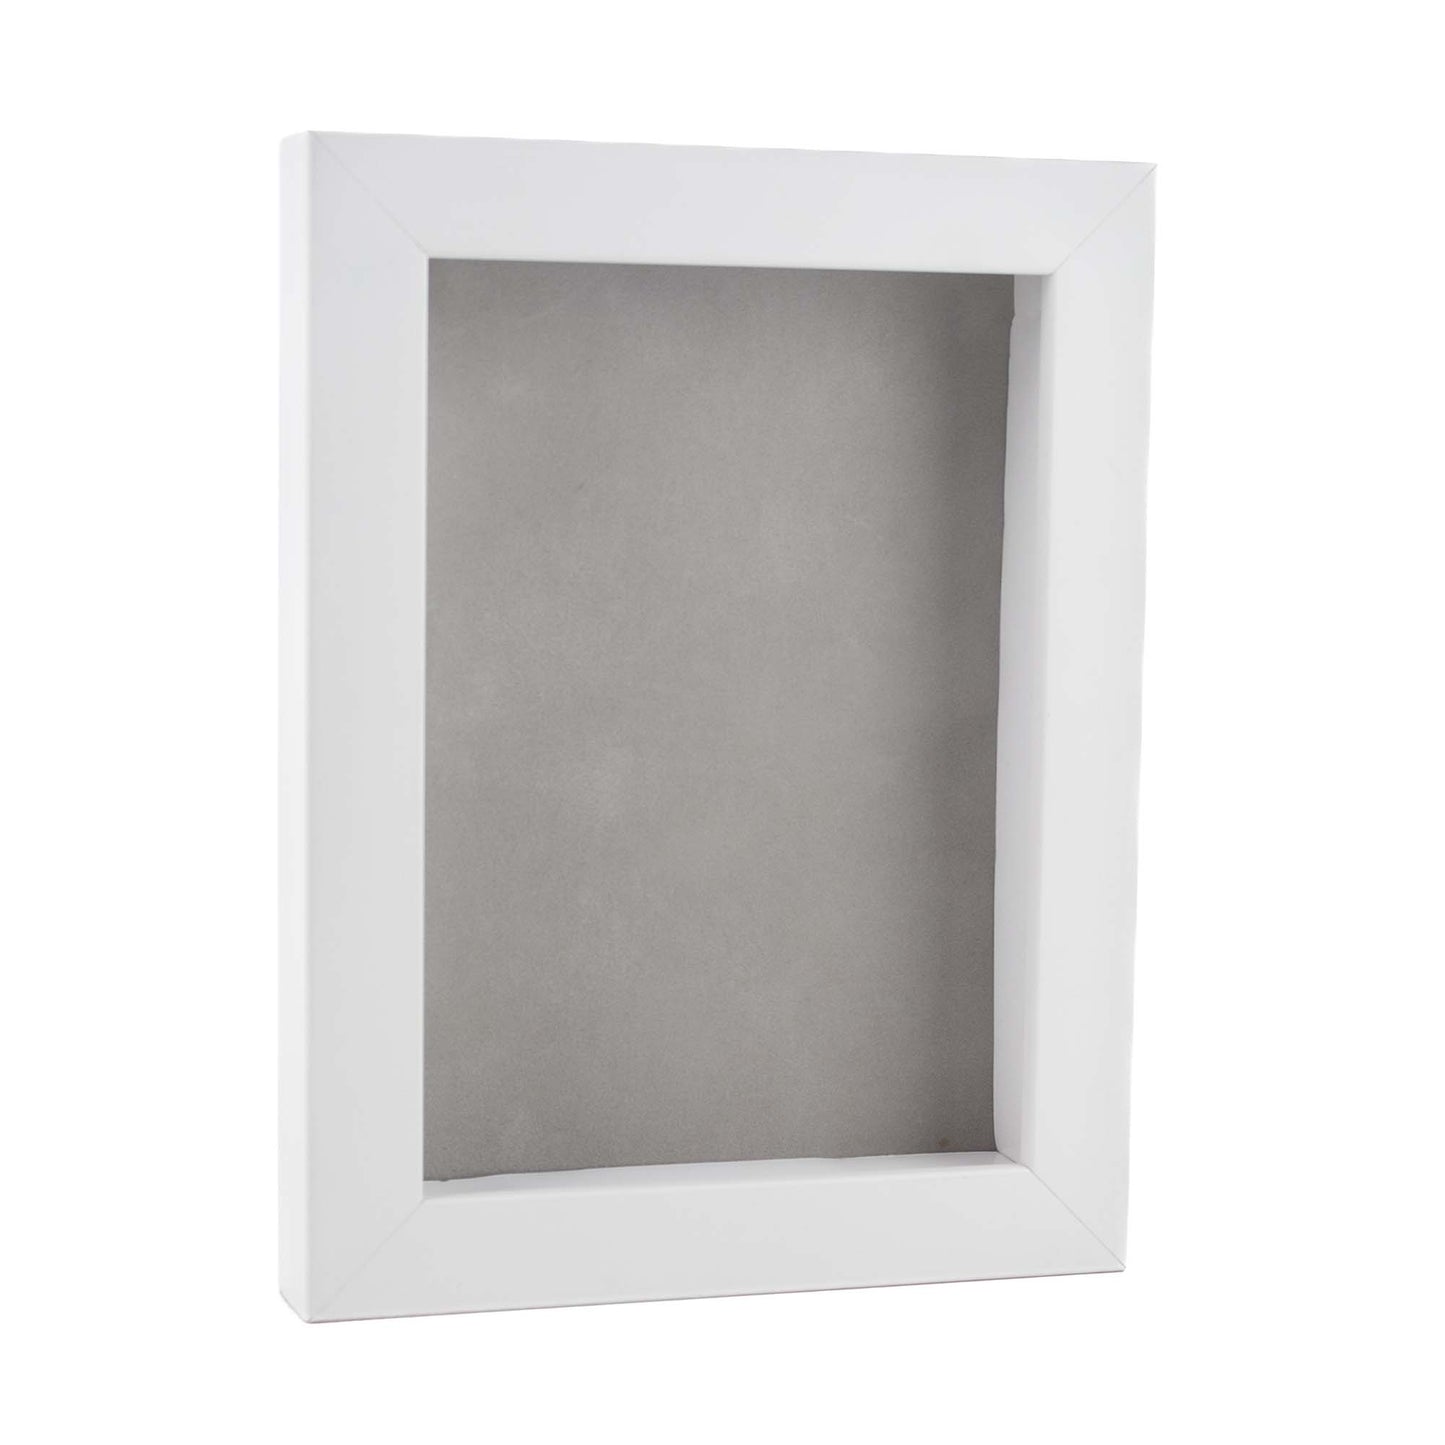 White Shadow Box Frame With Light Grey Acid-Free Suede Backing